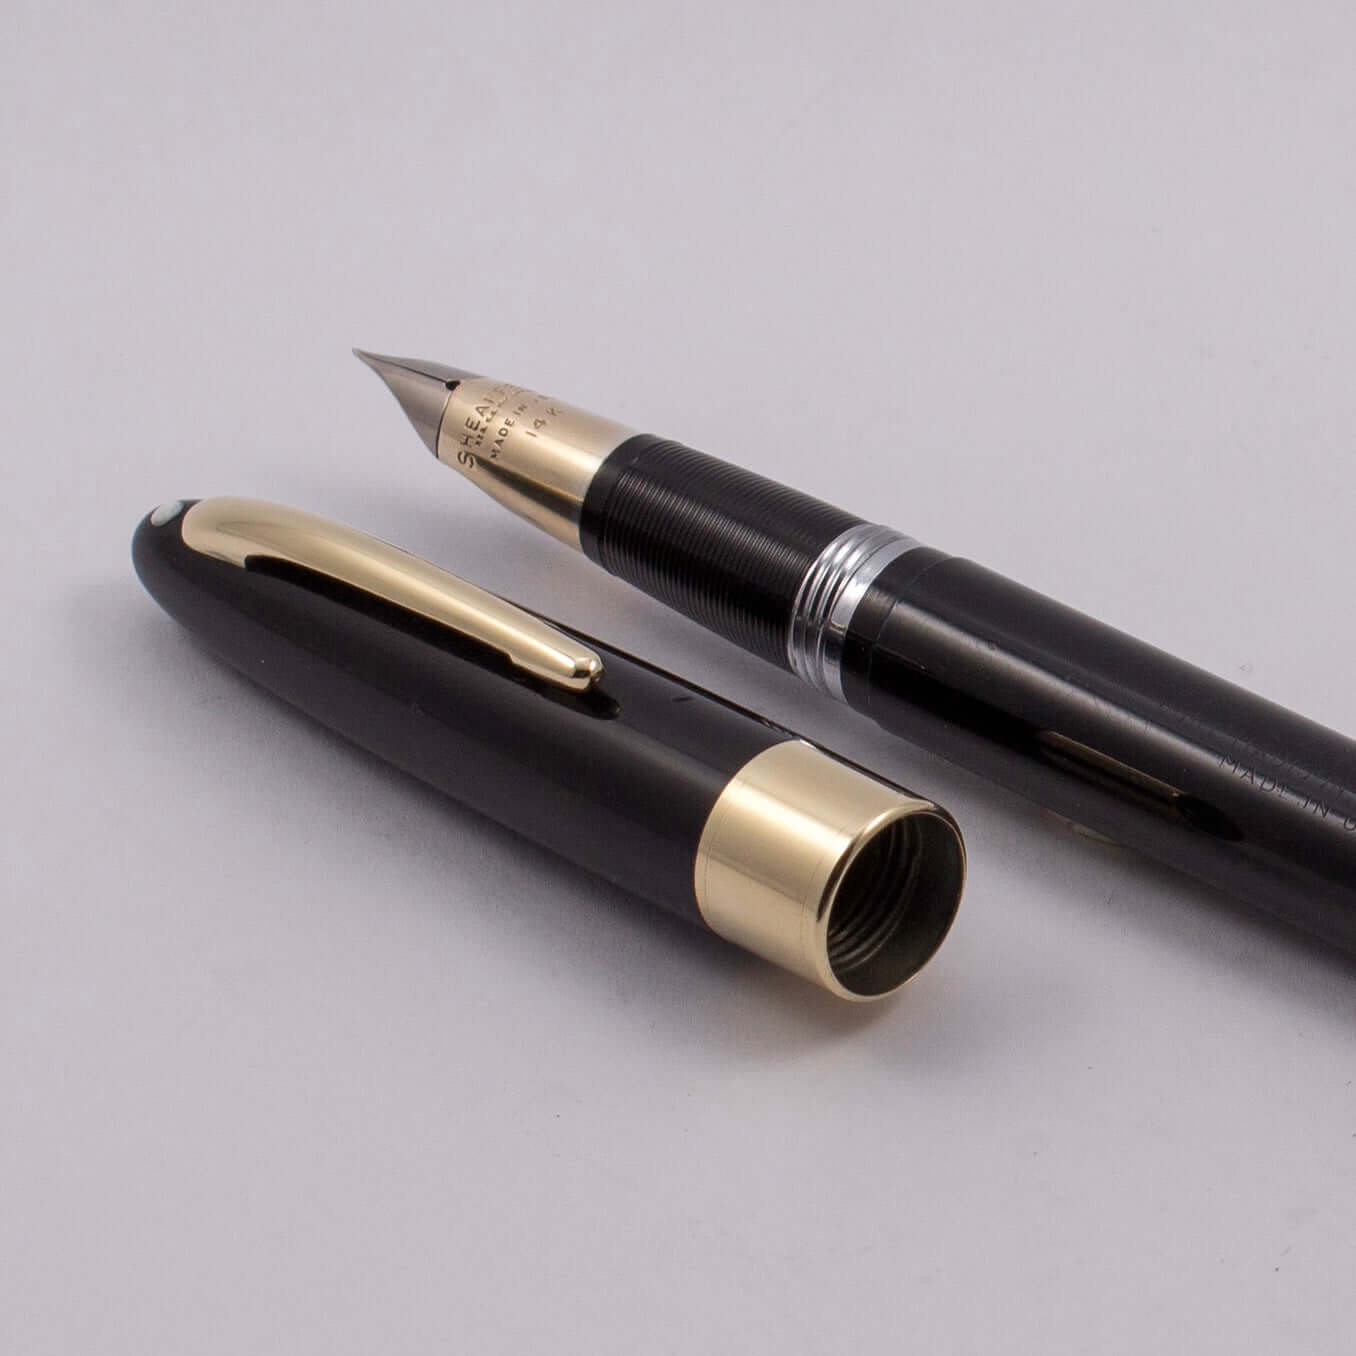 ${titleType: Restored Vintage Sheaffer Fountain Pen Product Name: Sheaffer Valiant Snorkel Manufacture Year: 1952-1959 Length: 5 9/16 Filling System: Snorkel Filler, Restored with new sac and O-ring Color/Pattern: Black with gold plated trim Nib Type/Cond